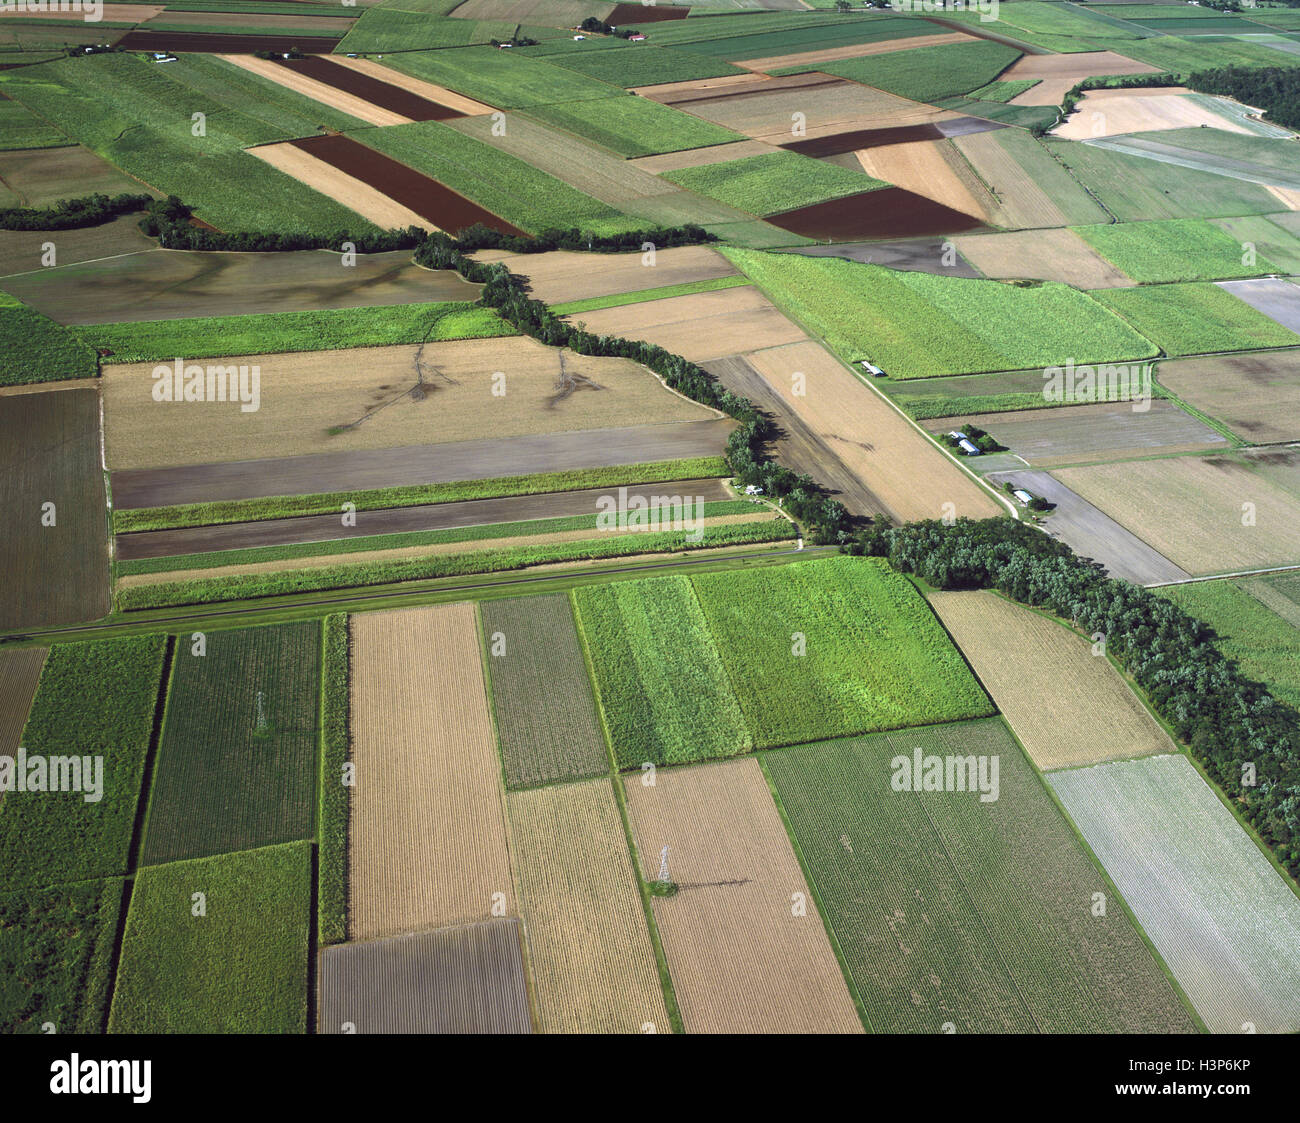 Canefields near Cairns, Stock Photo